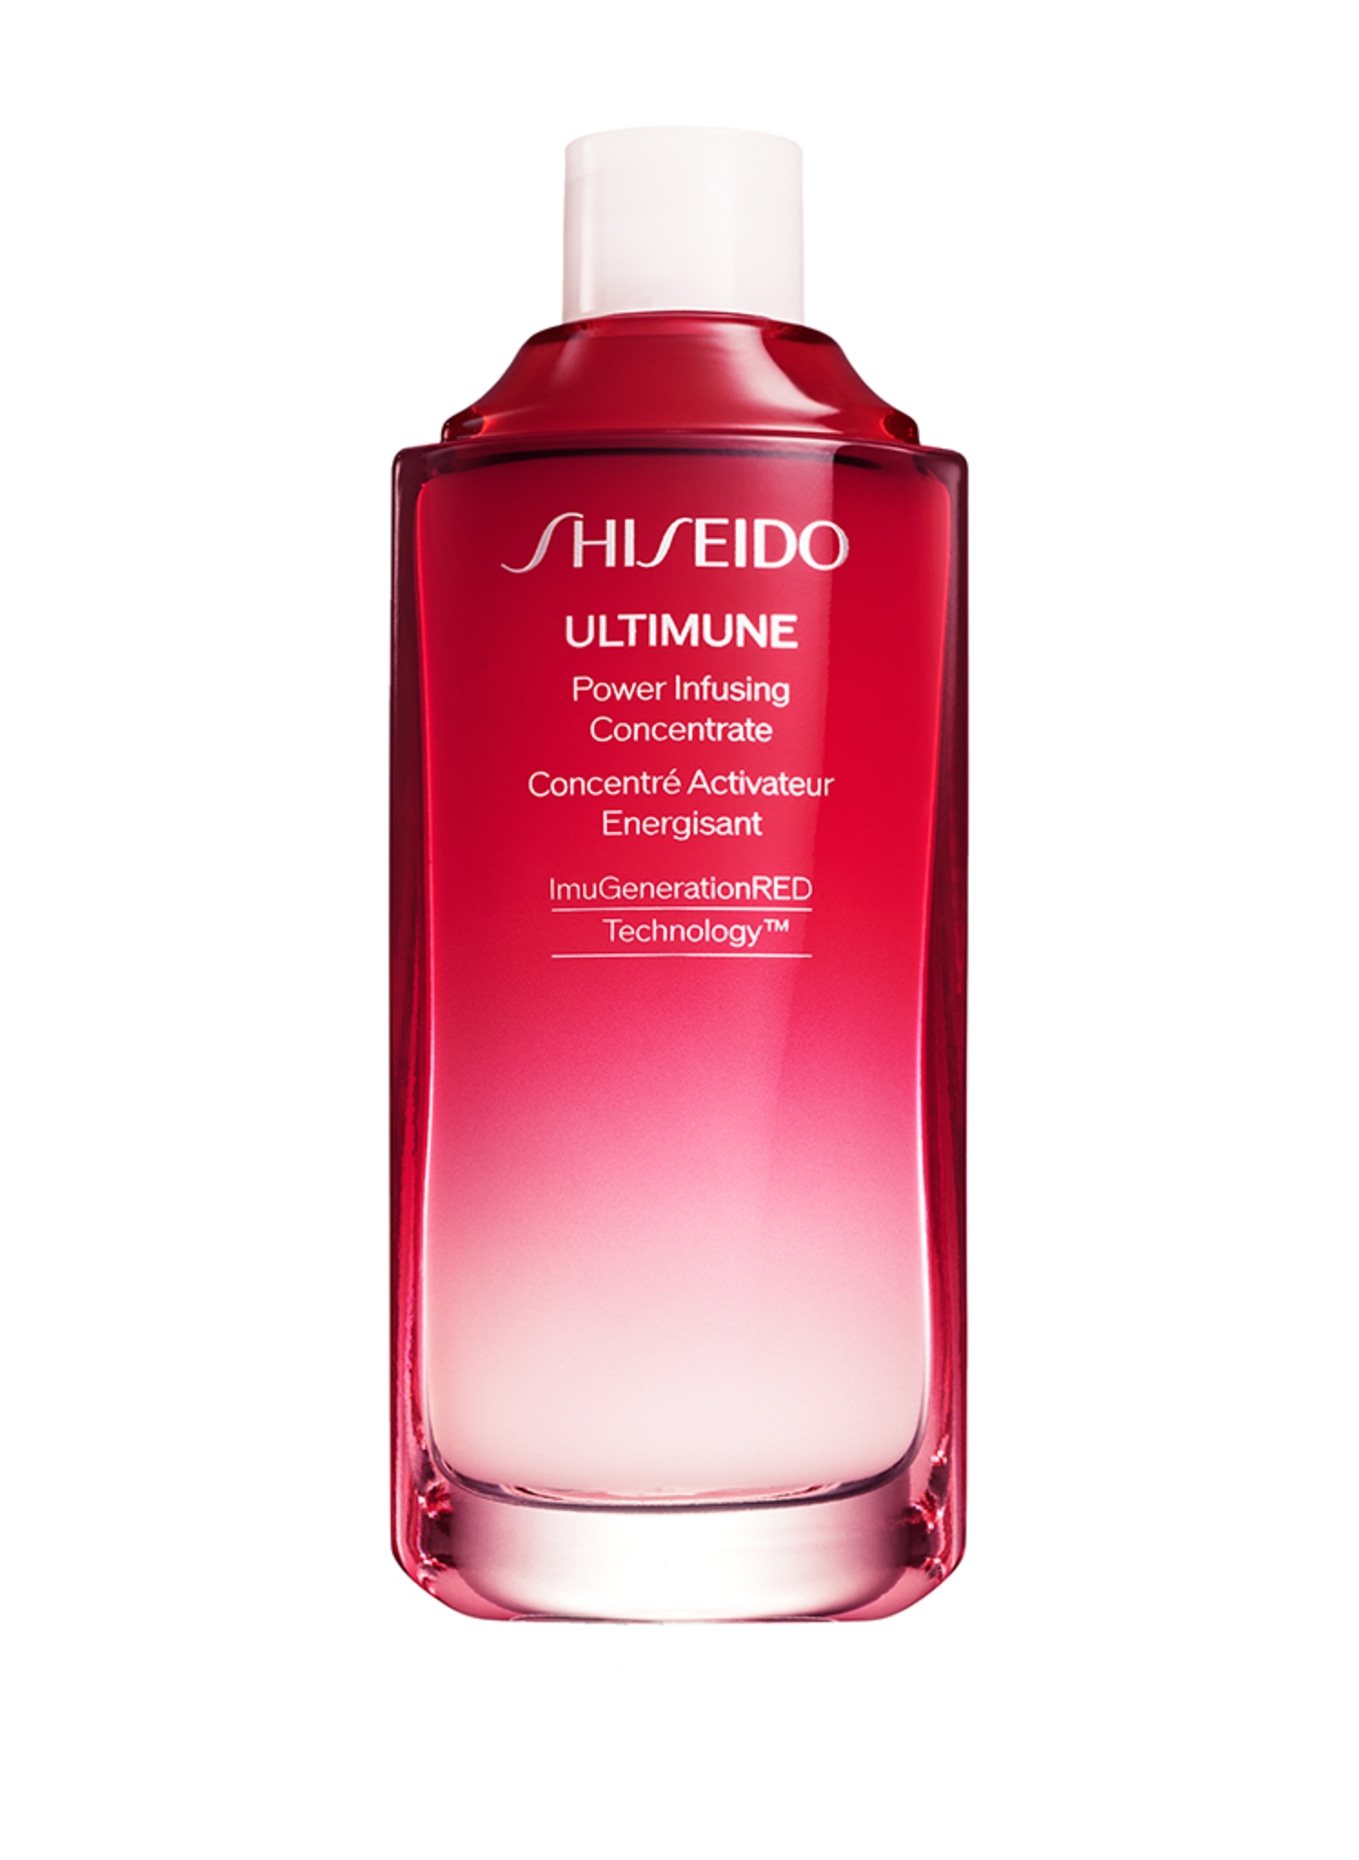 SHISEIDO ULTIMUNE POWER INFUSING CONCENTRATE REFILL (Obrazek 1)